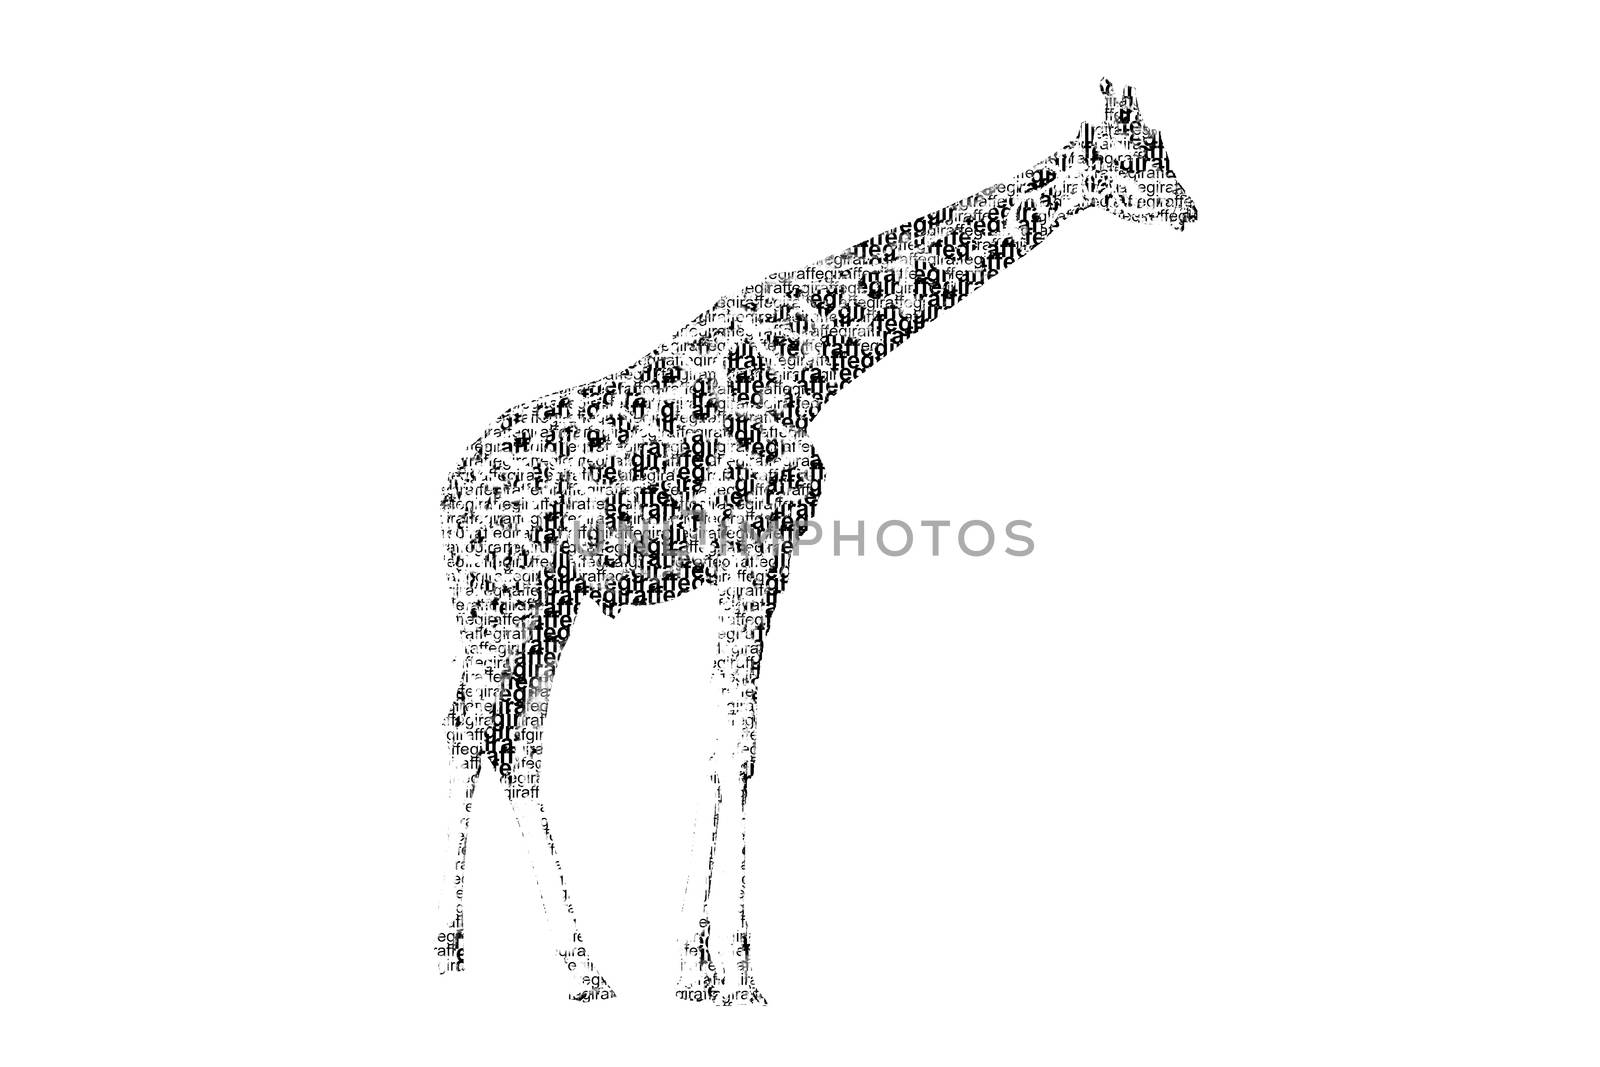 word giraffe mixed to be figure of giraffe, with typography styl by a3701027